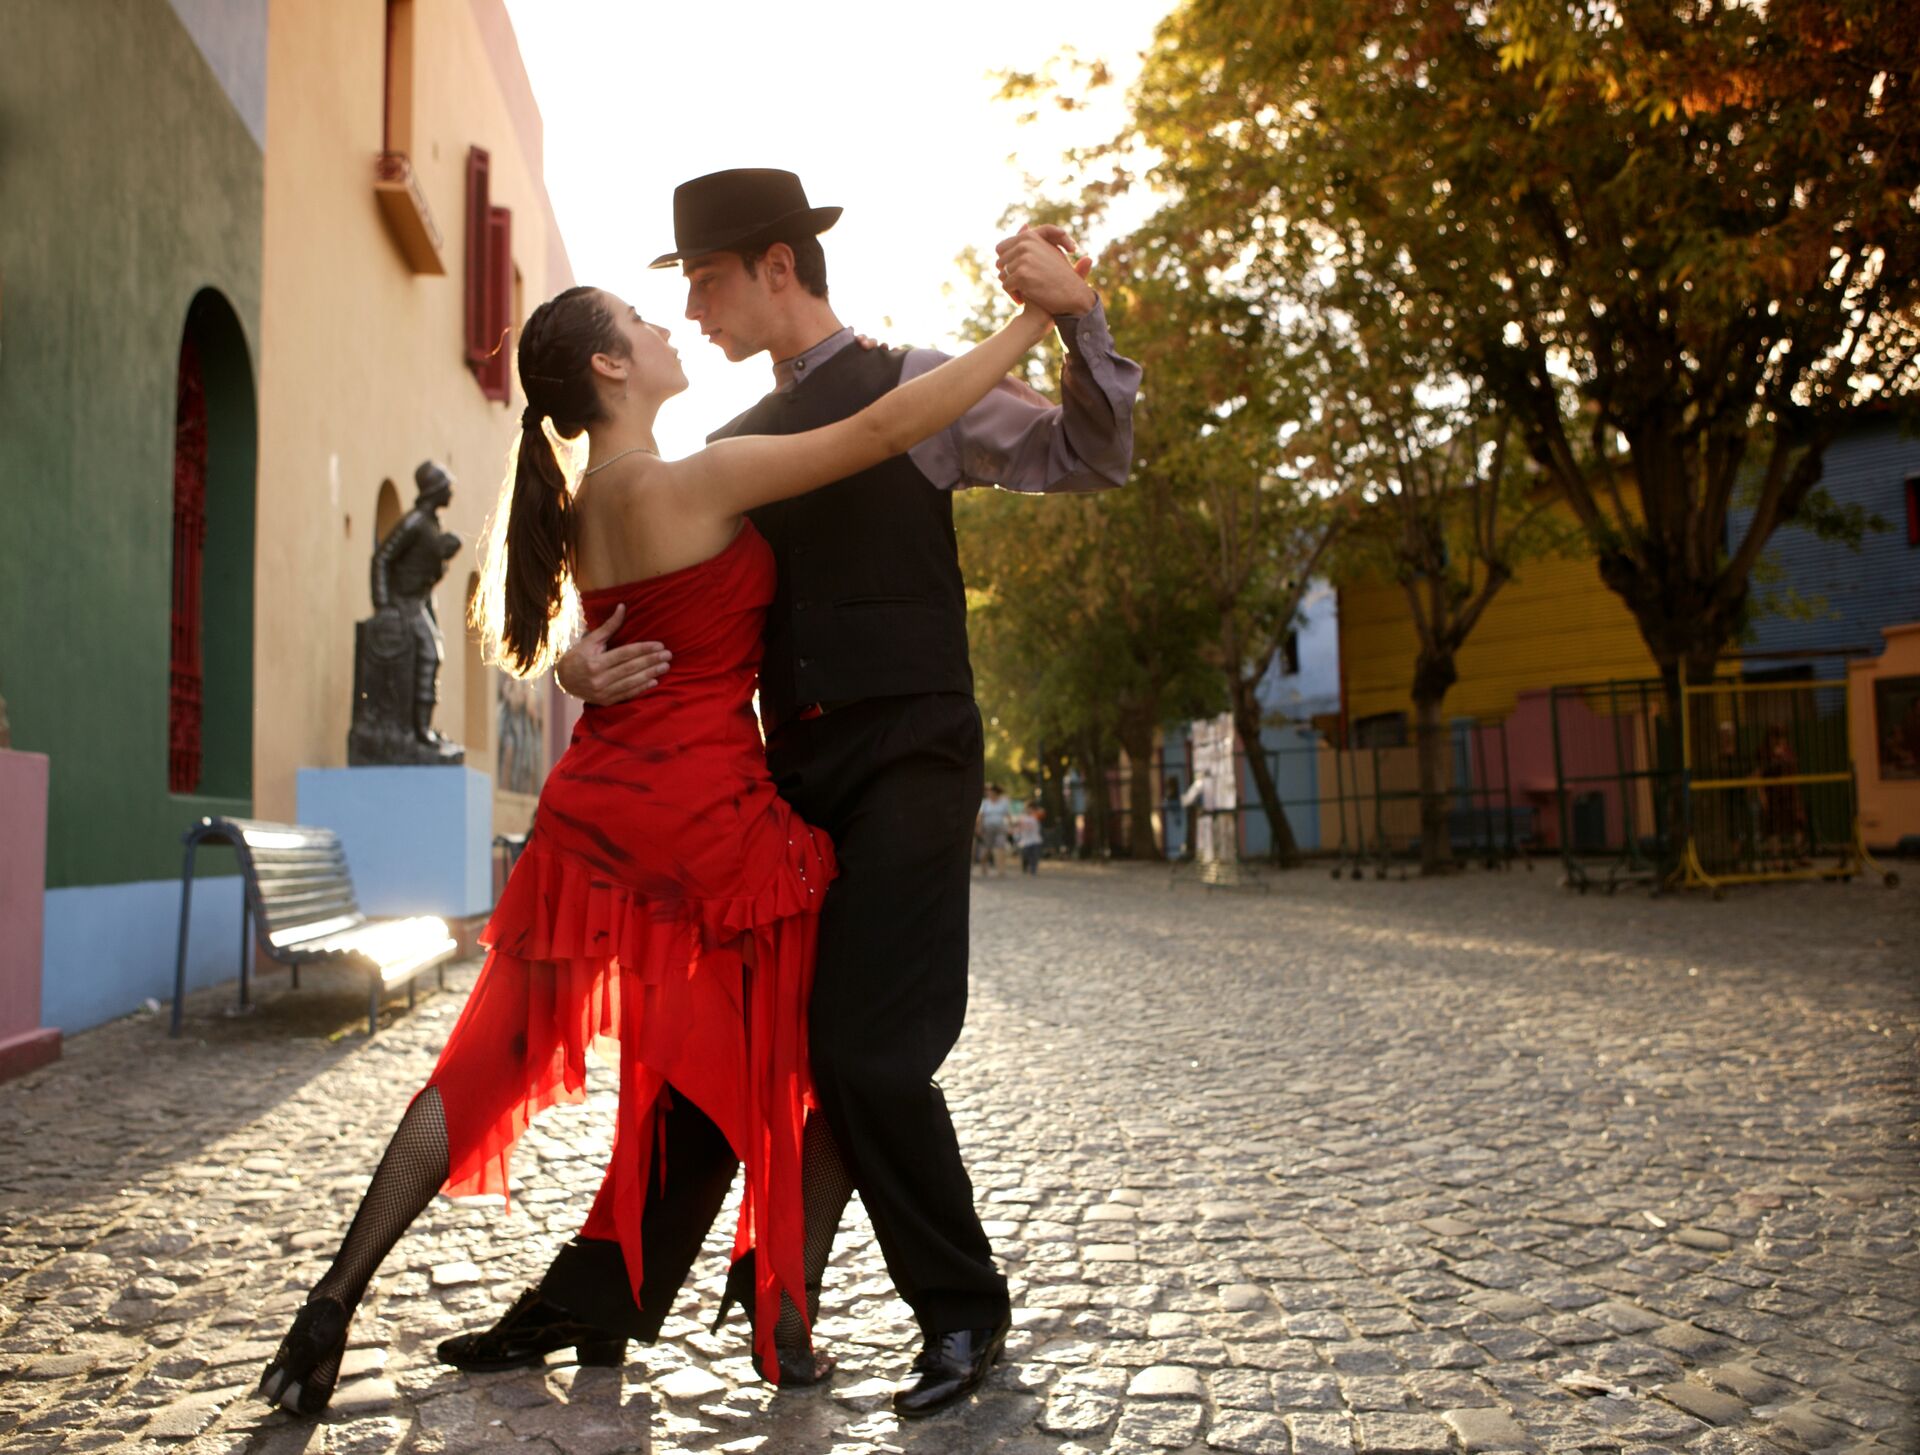 Image of young couple dancing tango in a cobbled street. The lady is wearing a bright red dress and the man is in black, with the sun, houses and trees behind them